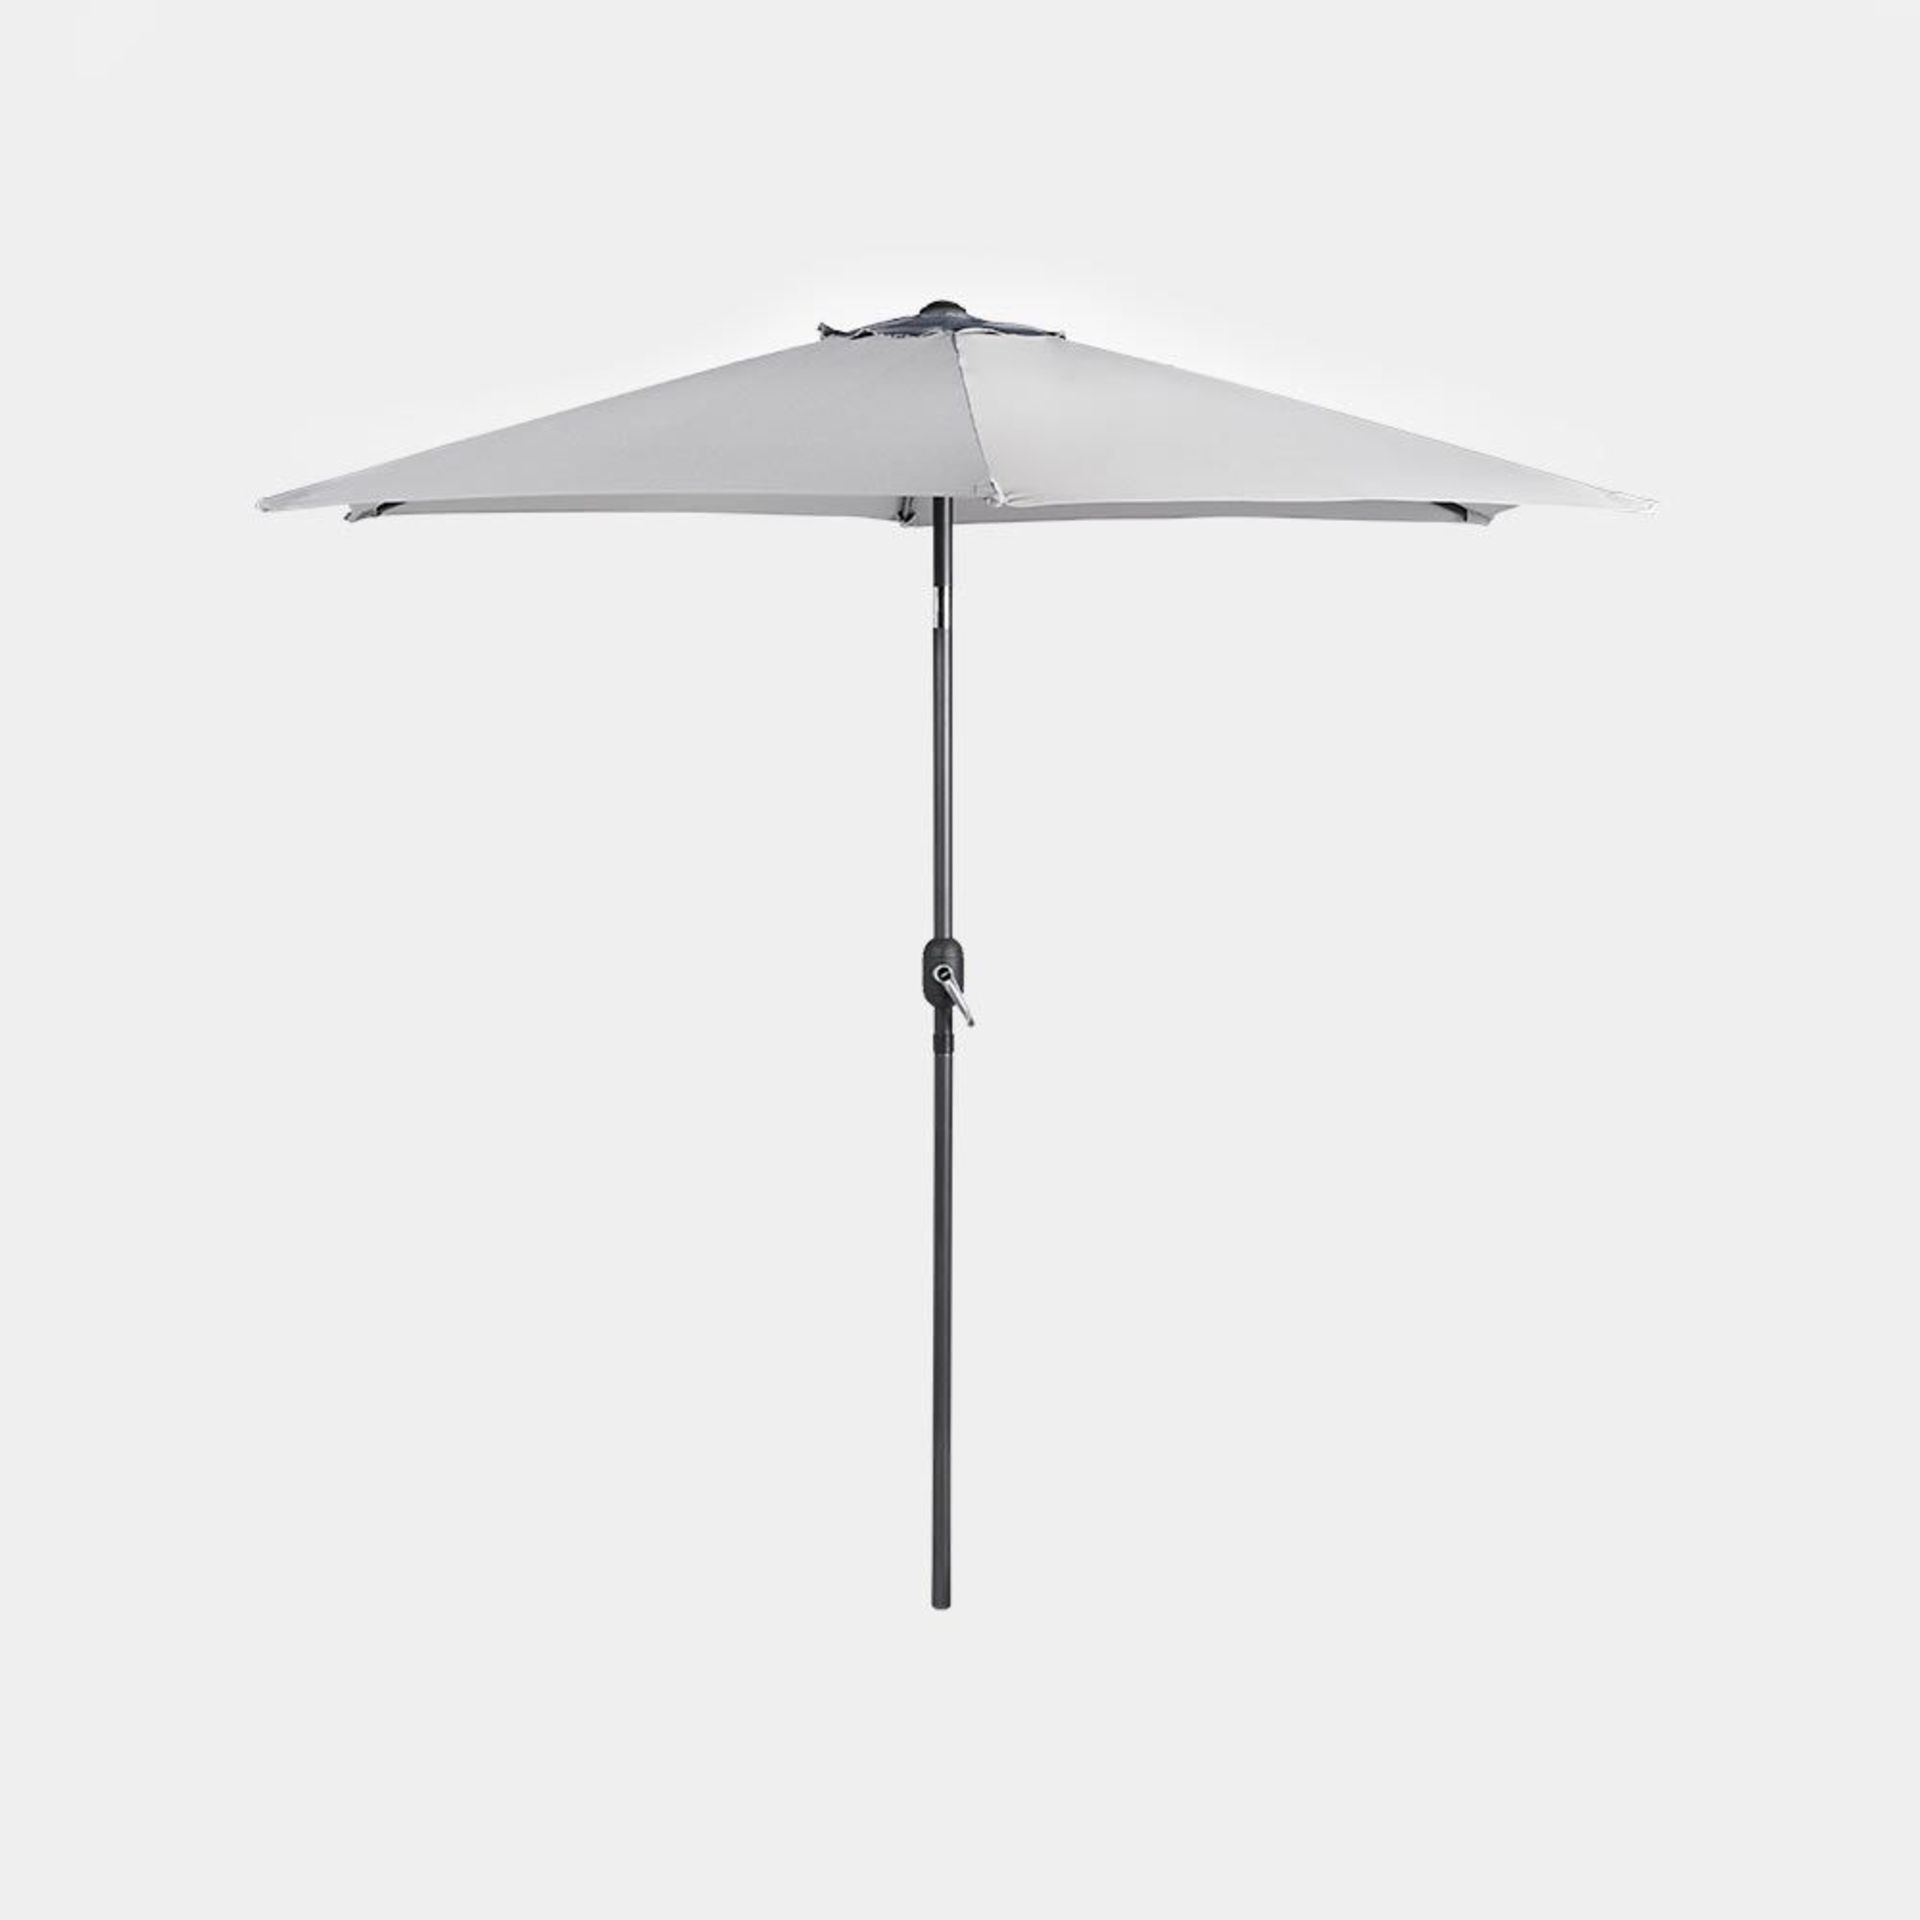 Grey 2.7m Steel Garden Parasol. Not just beautiful to look at, the 2.7 metre canopy offers UV50+